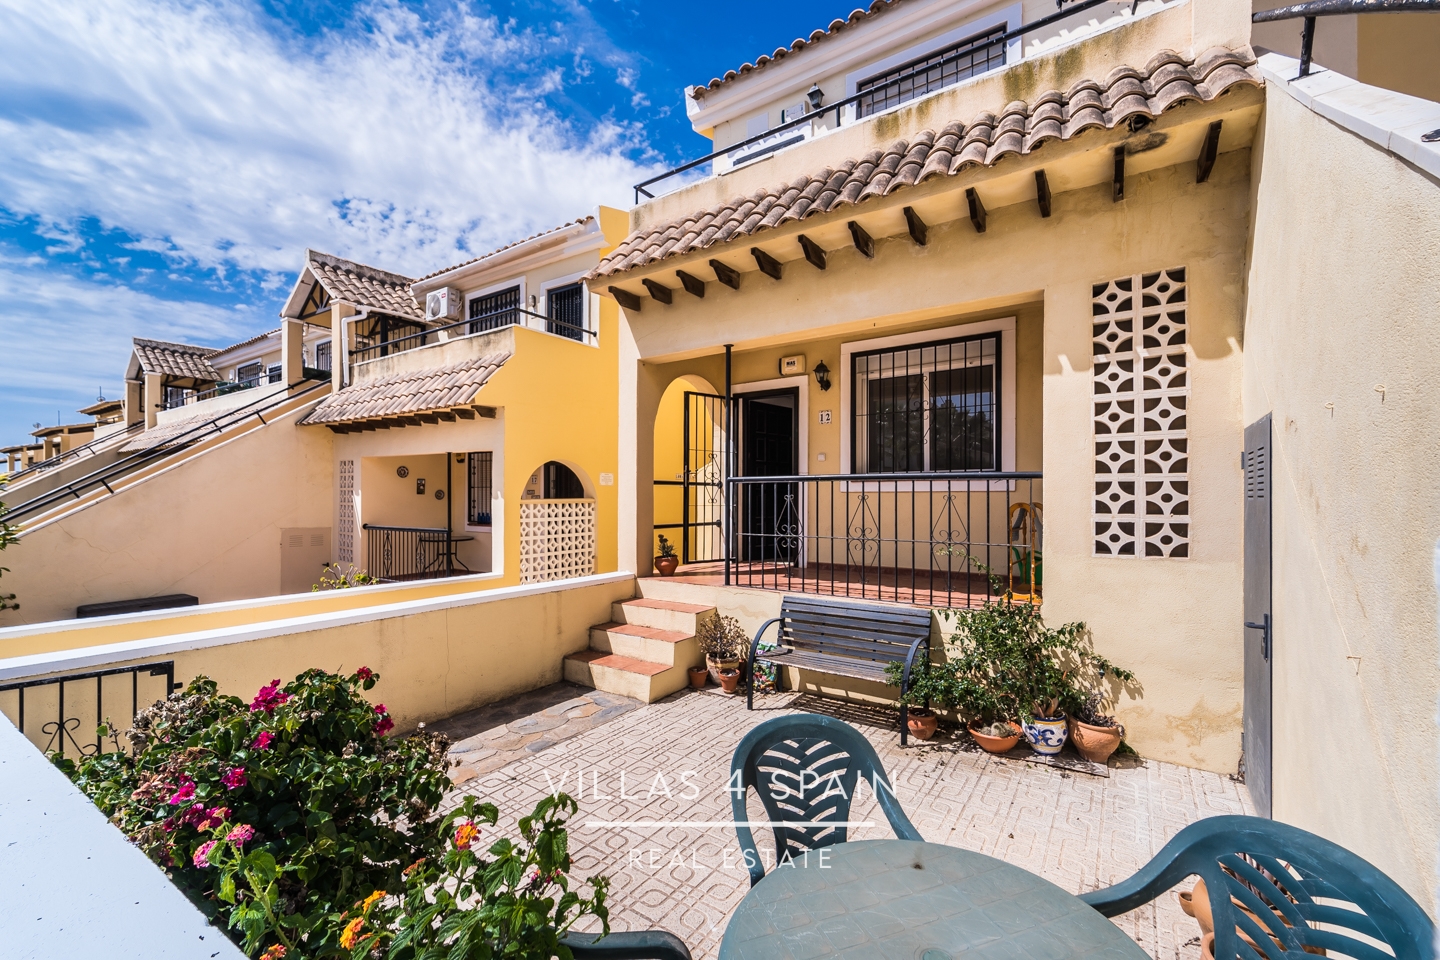 2 bedroom 1 bathroom ground floor apartment with a front and back garden with community pool located 2 min from Villamartin Plaza or 5min to the beach! 